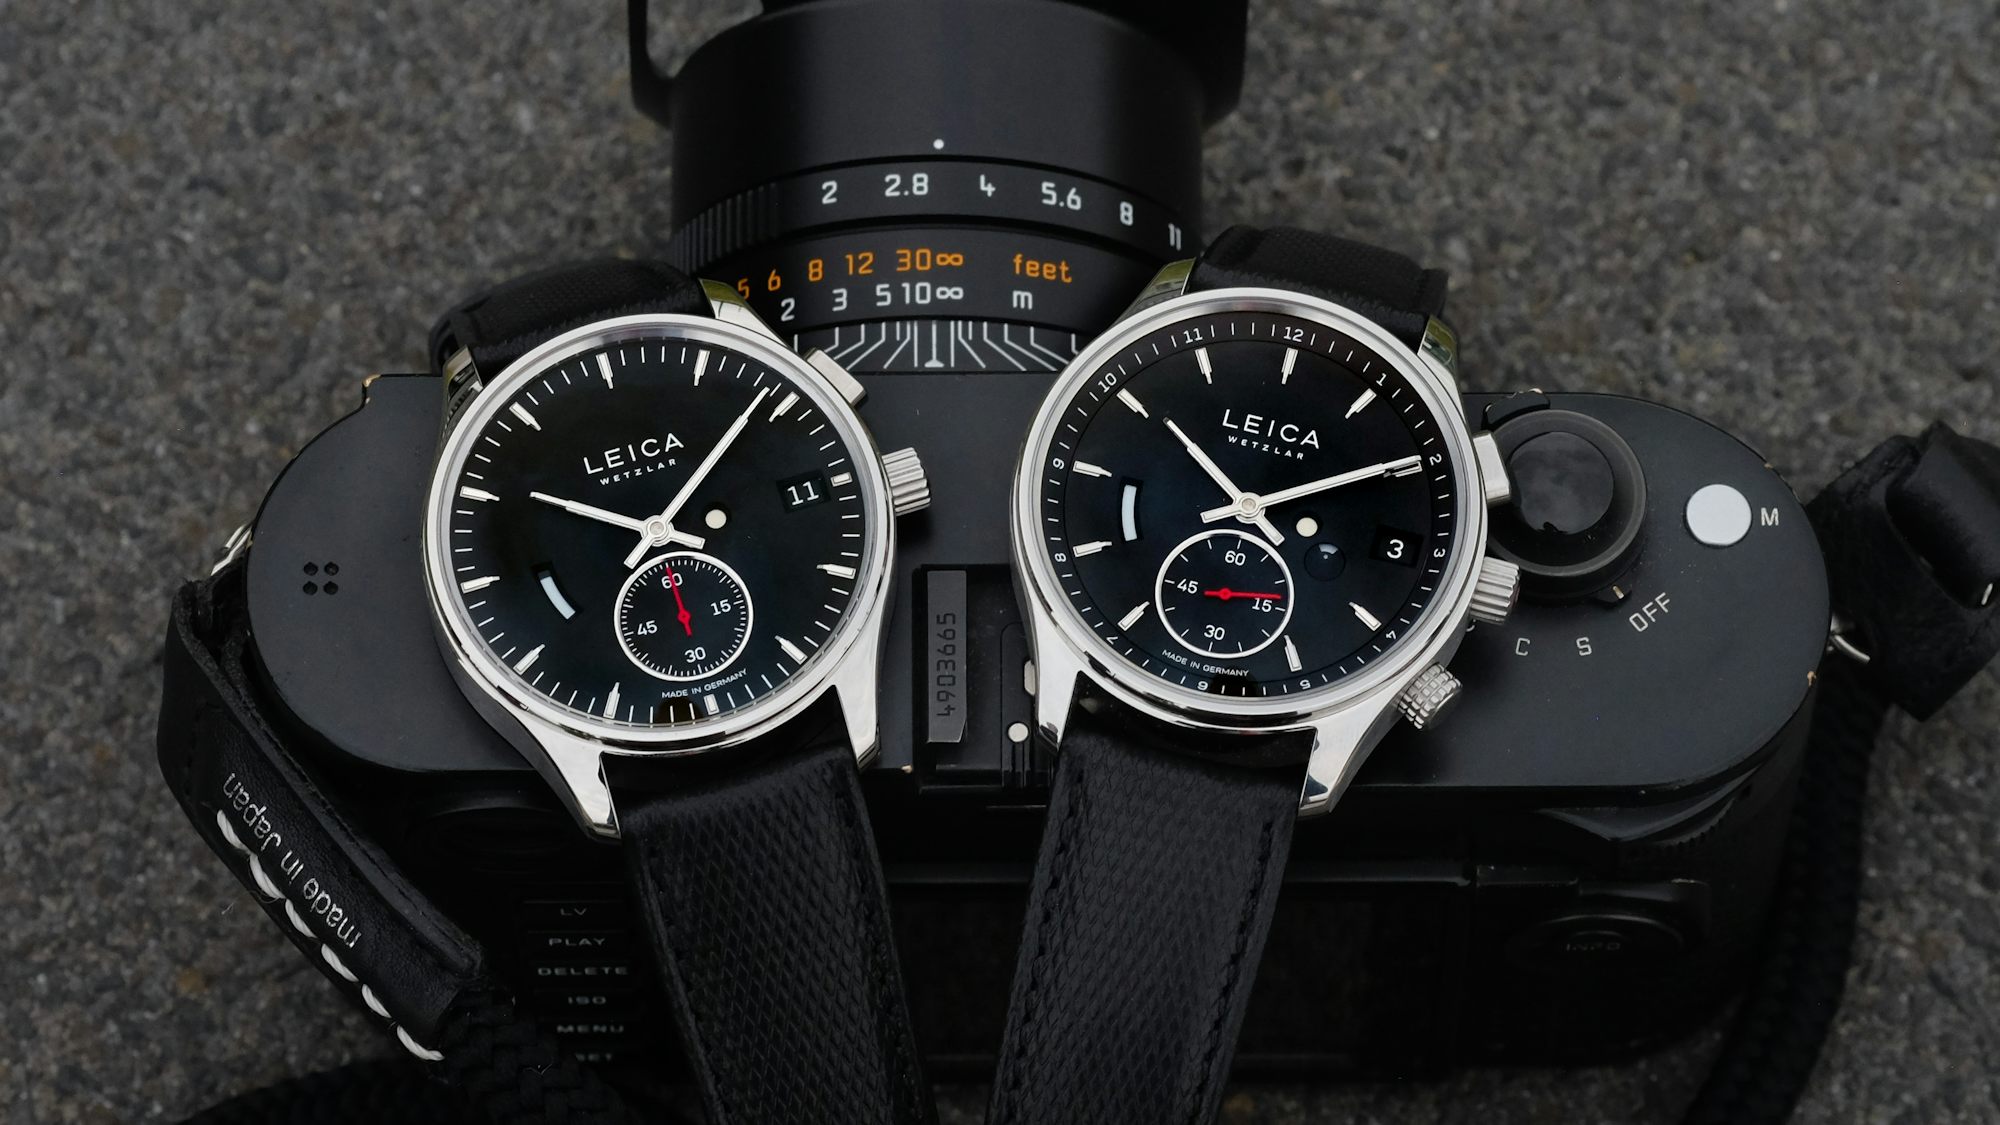 Hodinkee Introducing The Leica L1 And L2 Watches (Live Pics & Details)